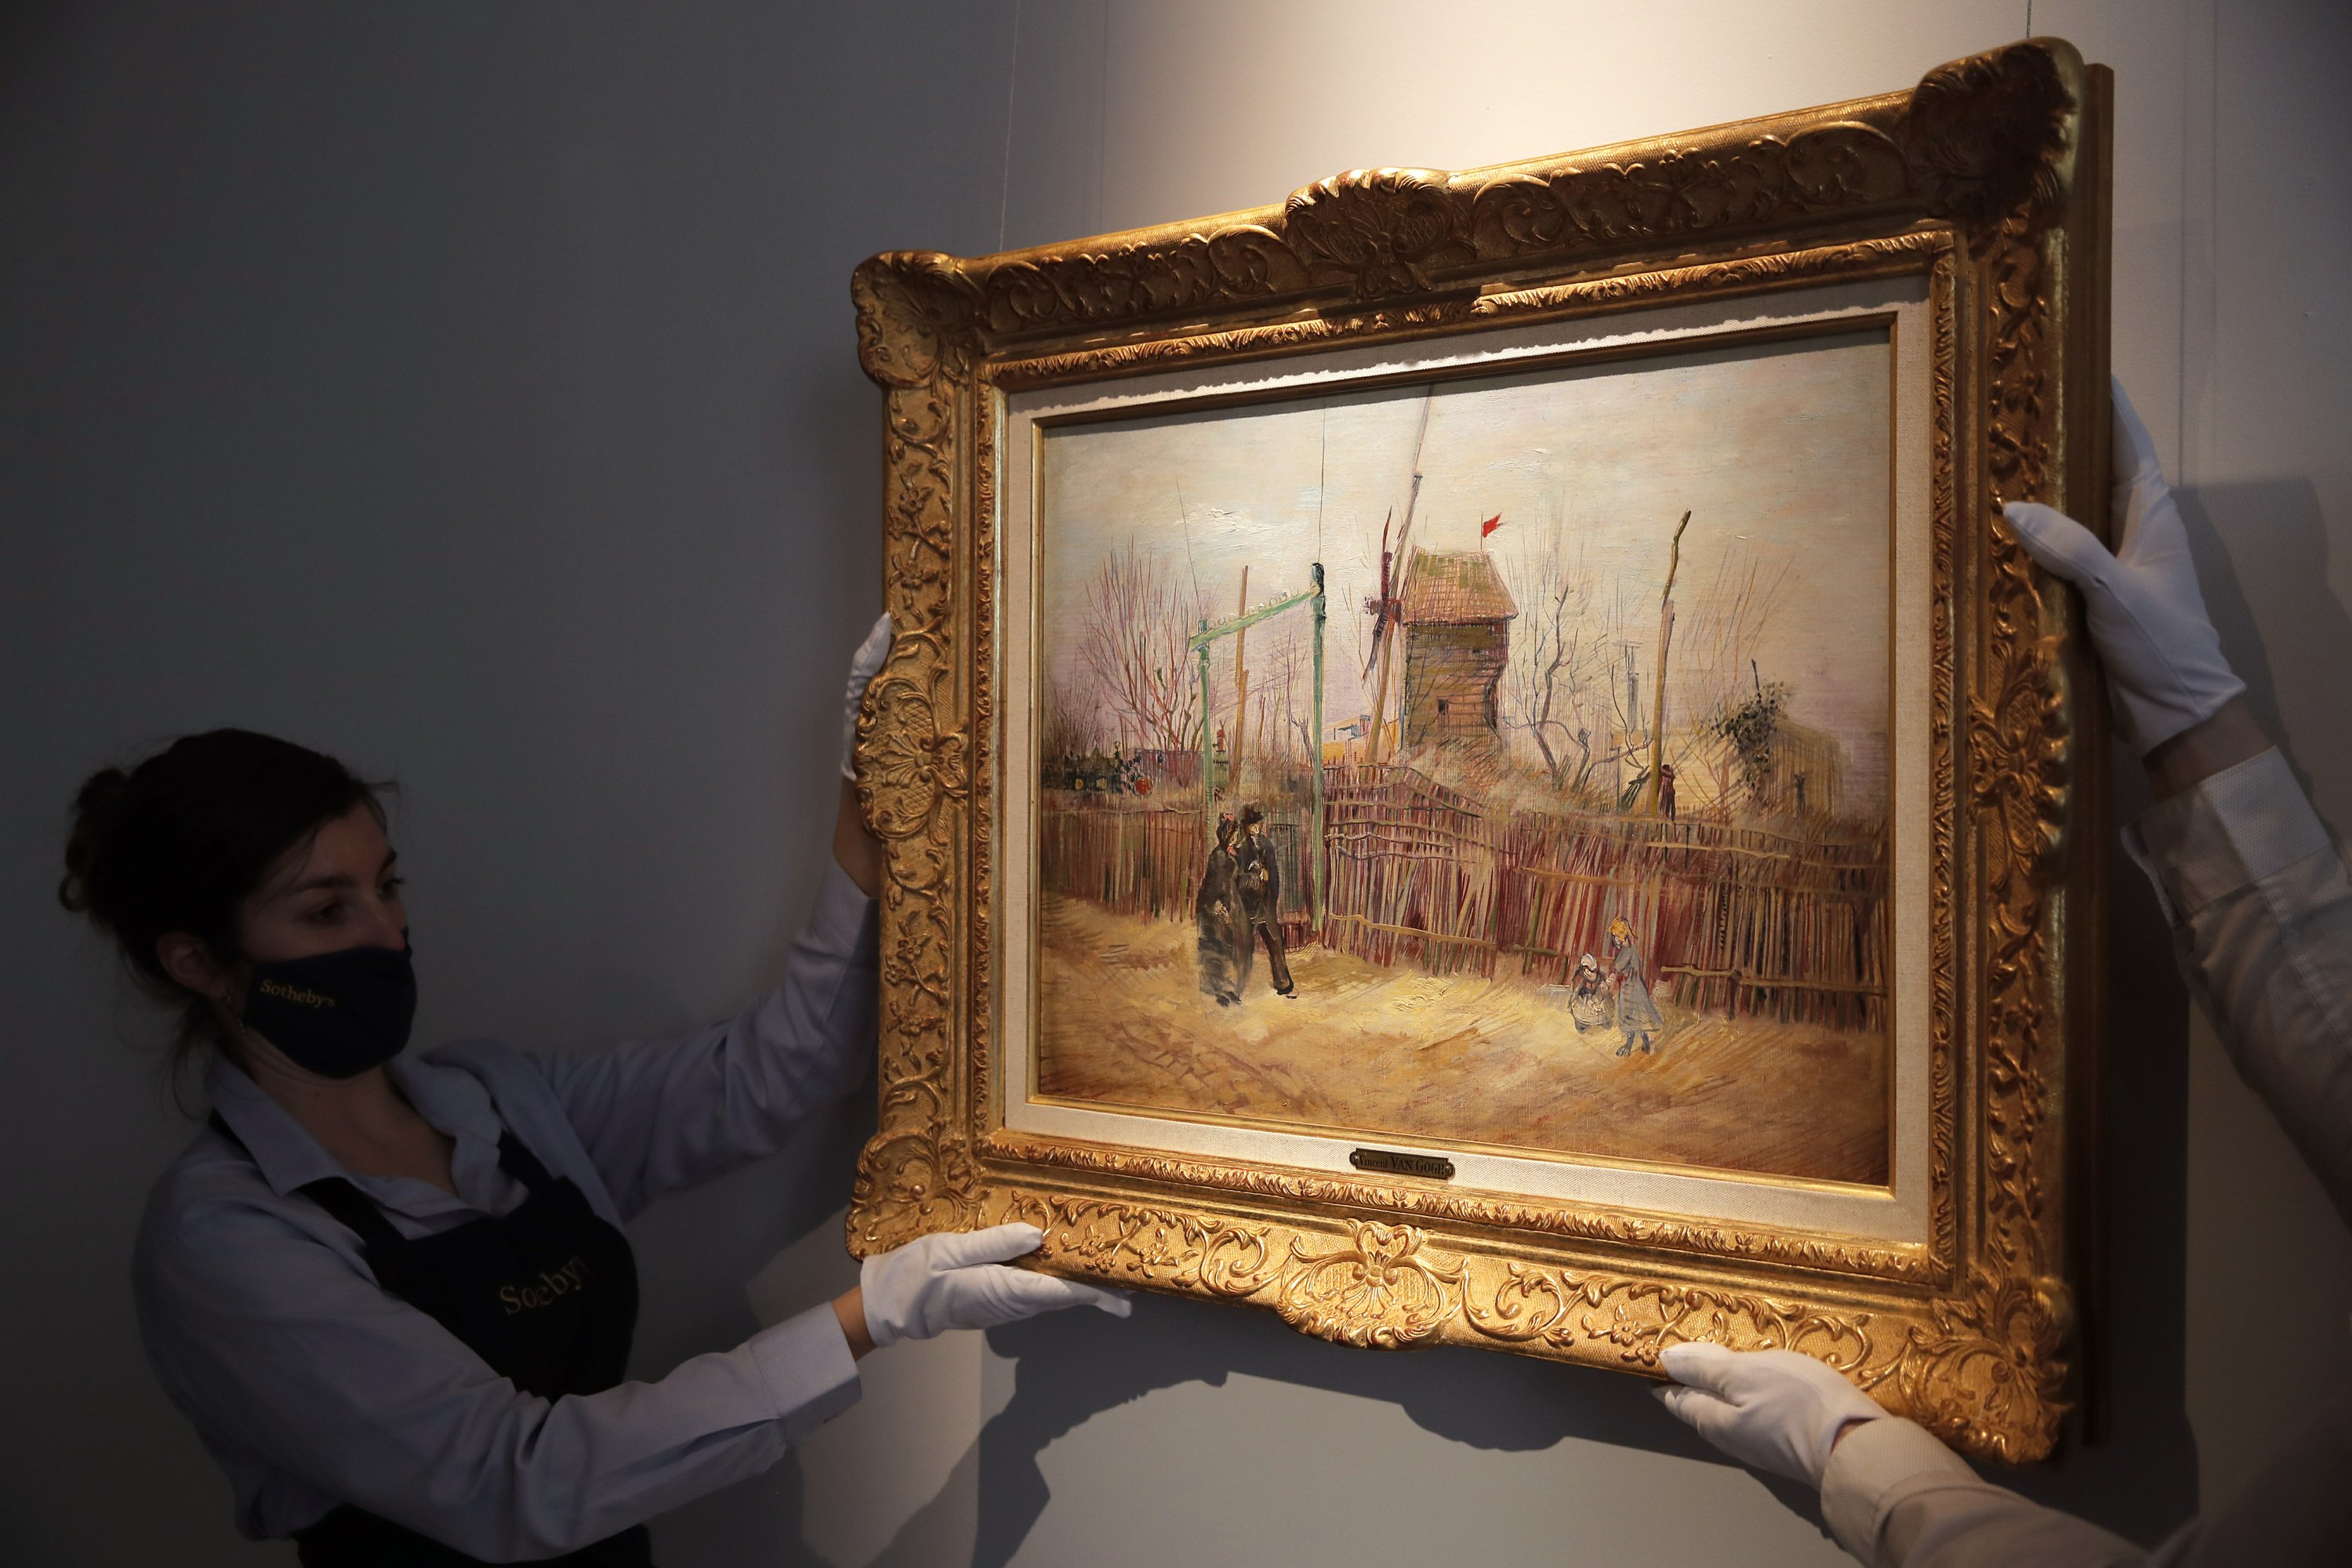 Some Gogh paintings are rarely exhibited before the auction